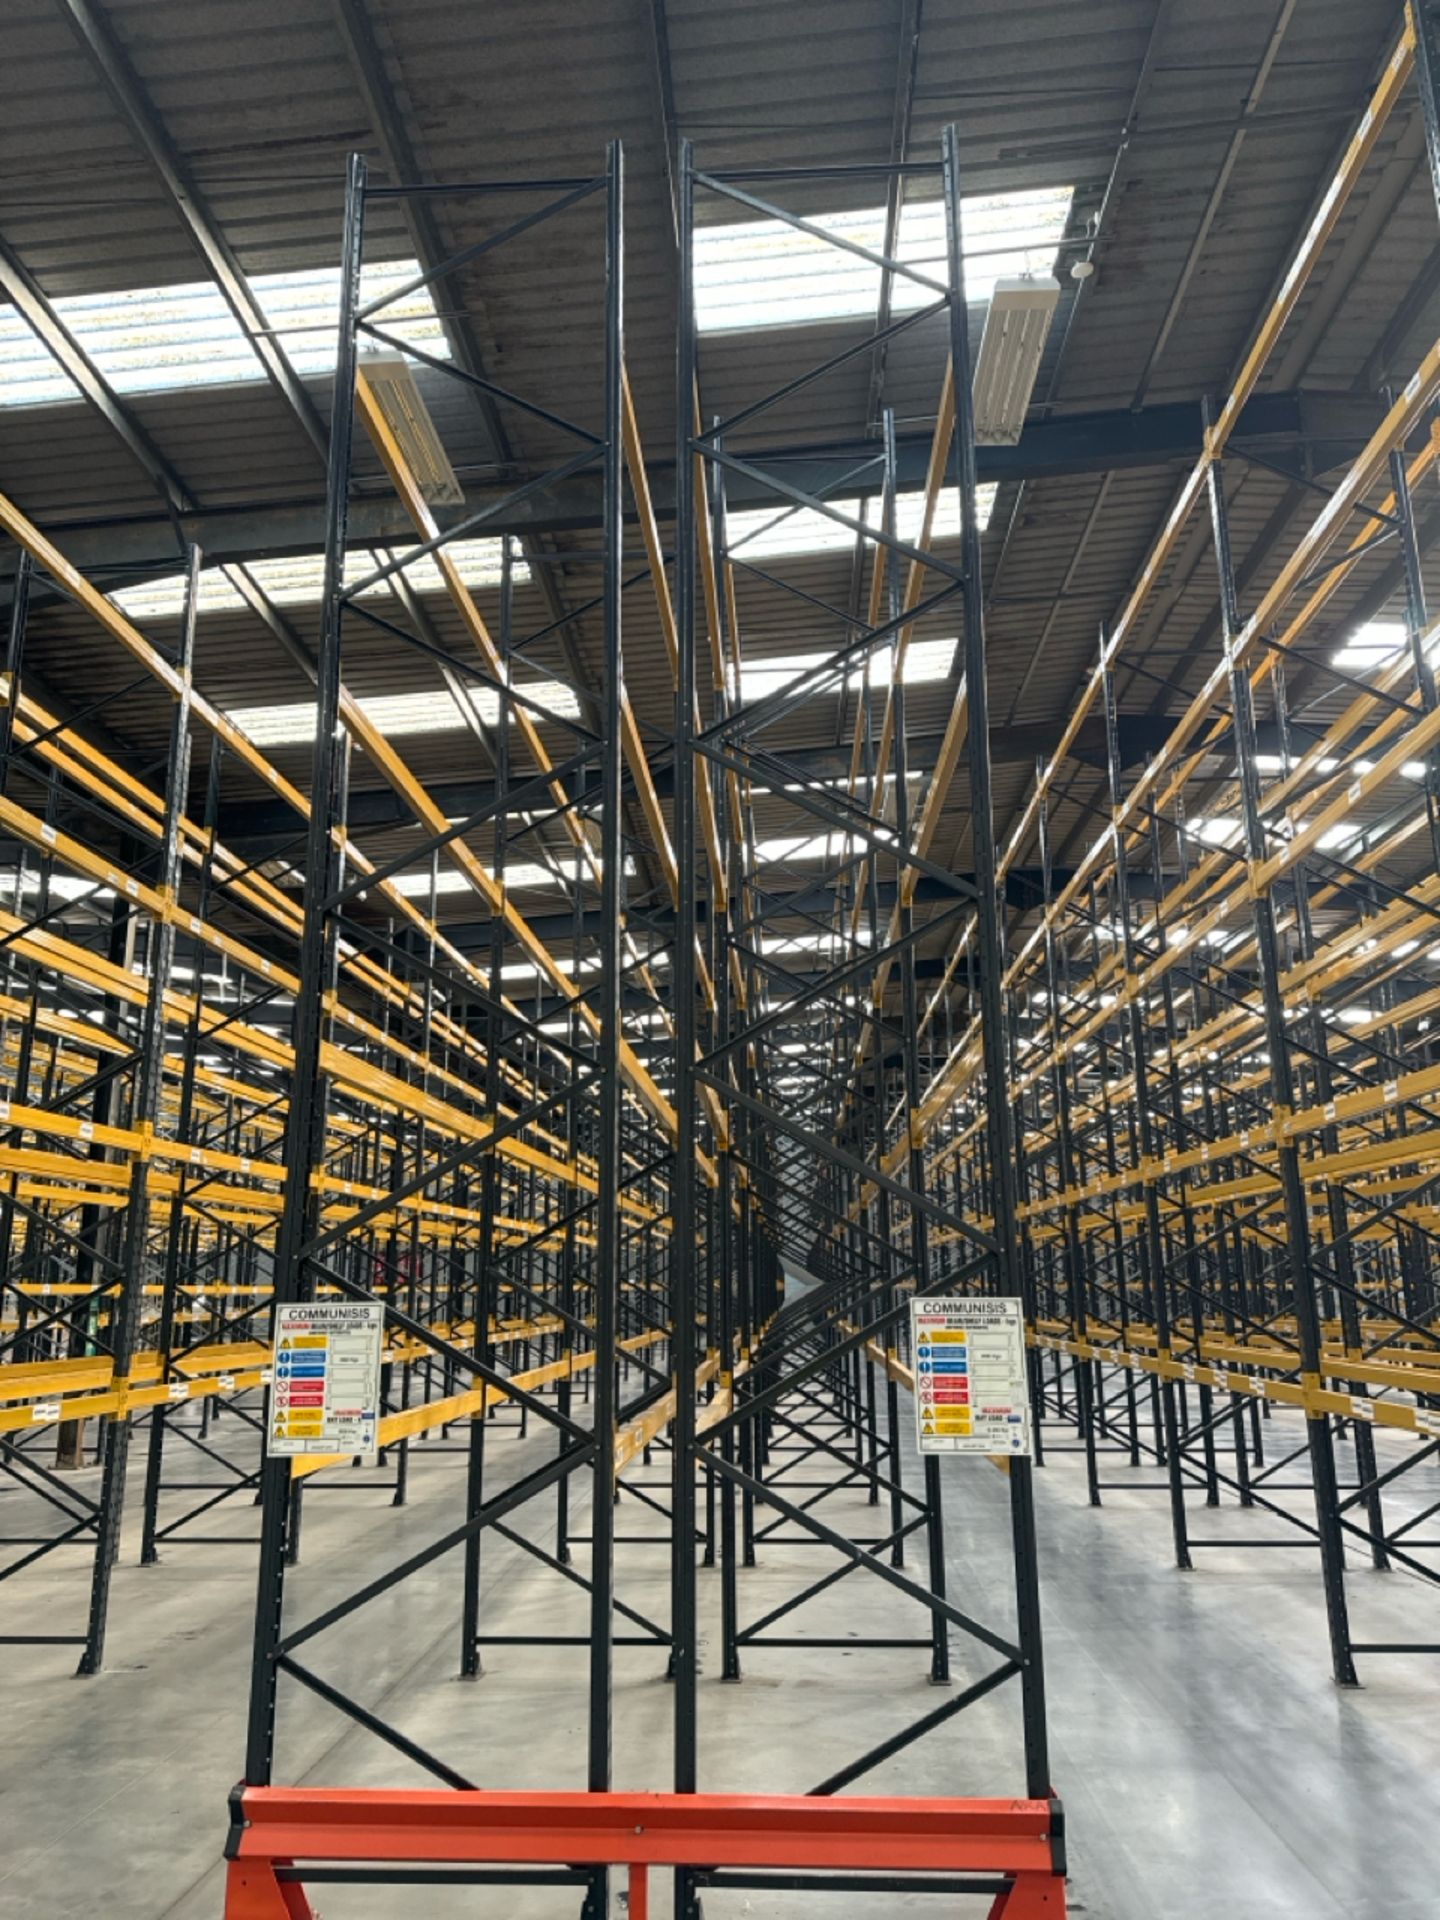 40 Bays Of Back To Back Boltless Industrial Pallet - Image 2 of 8